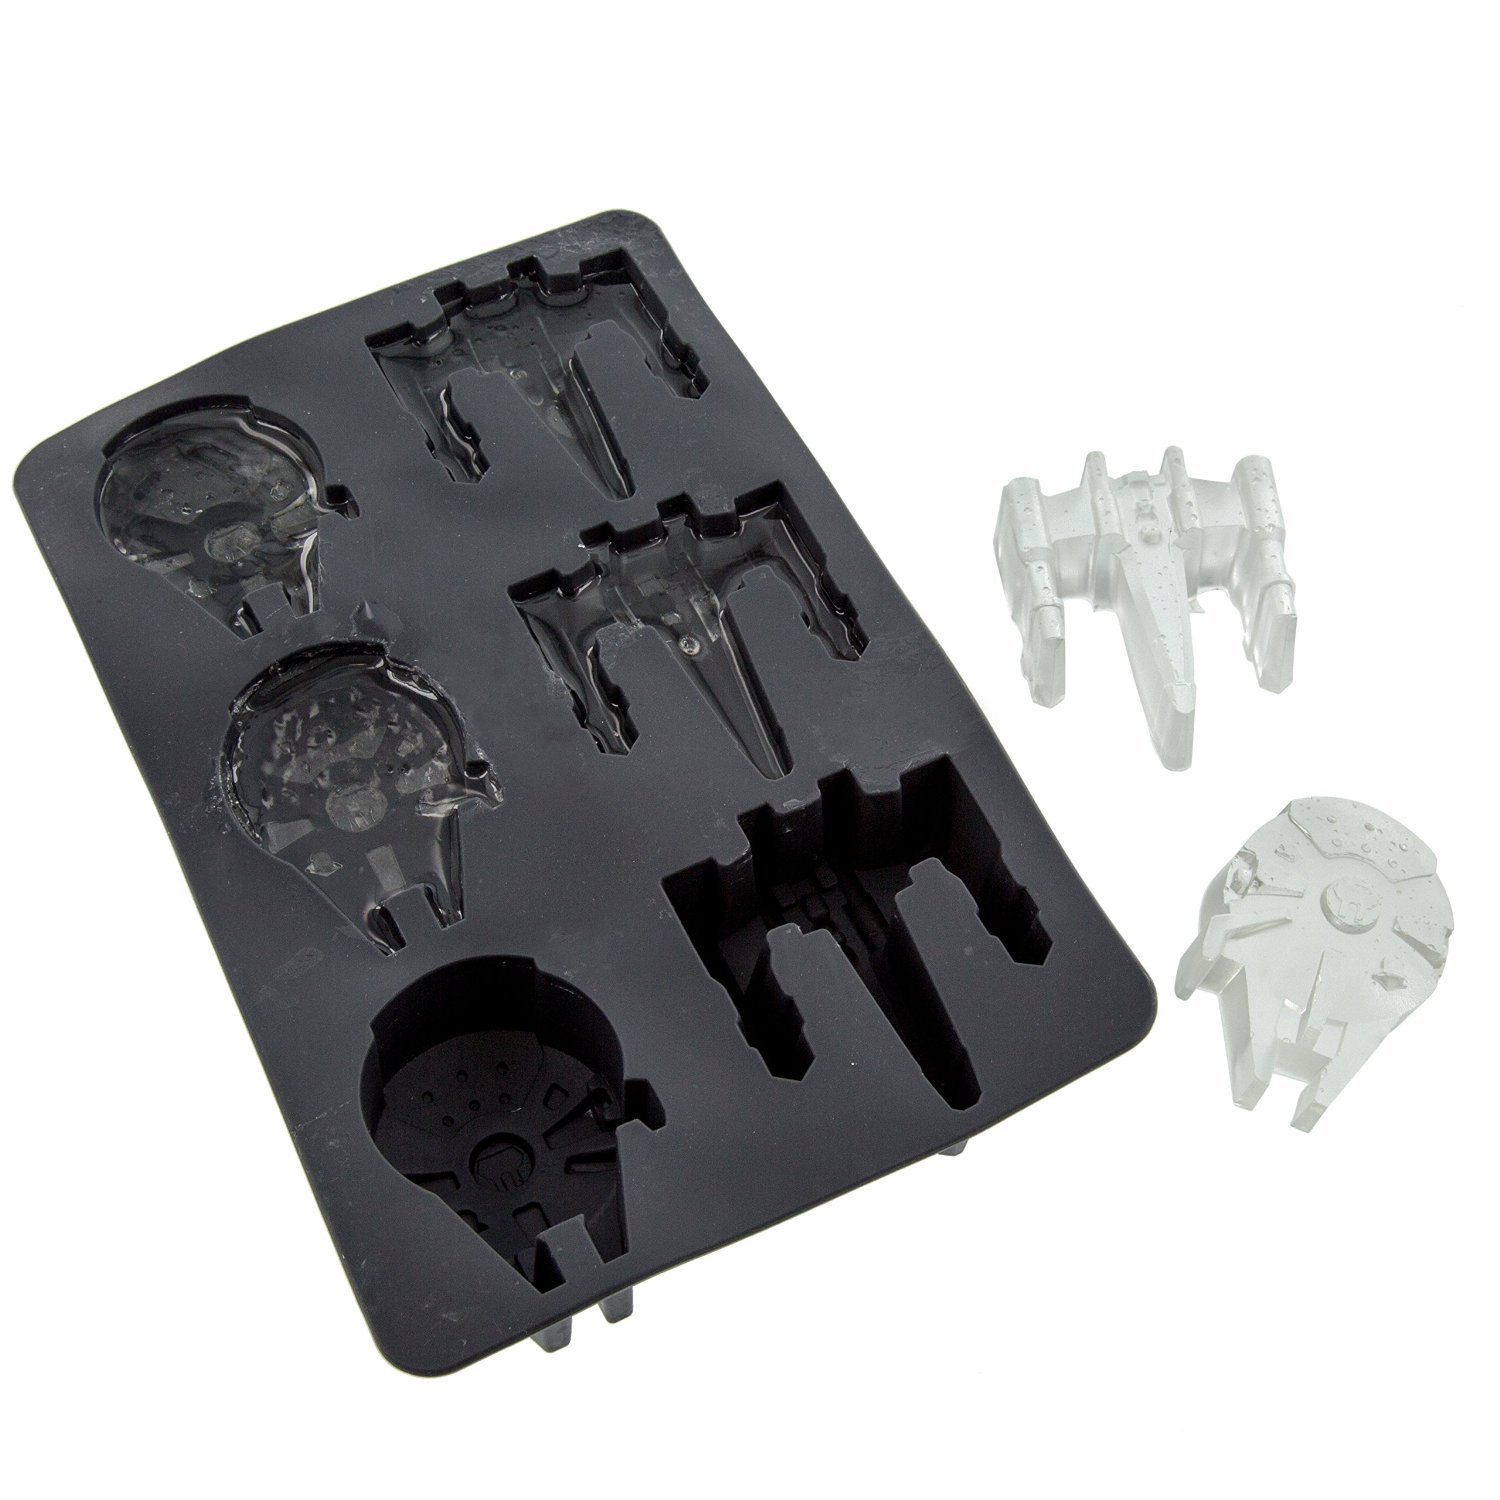 Star Wars X-Wing and Millennium Falcon Ice Cube Tray